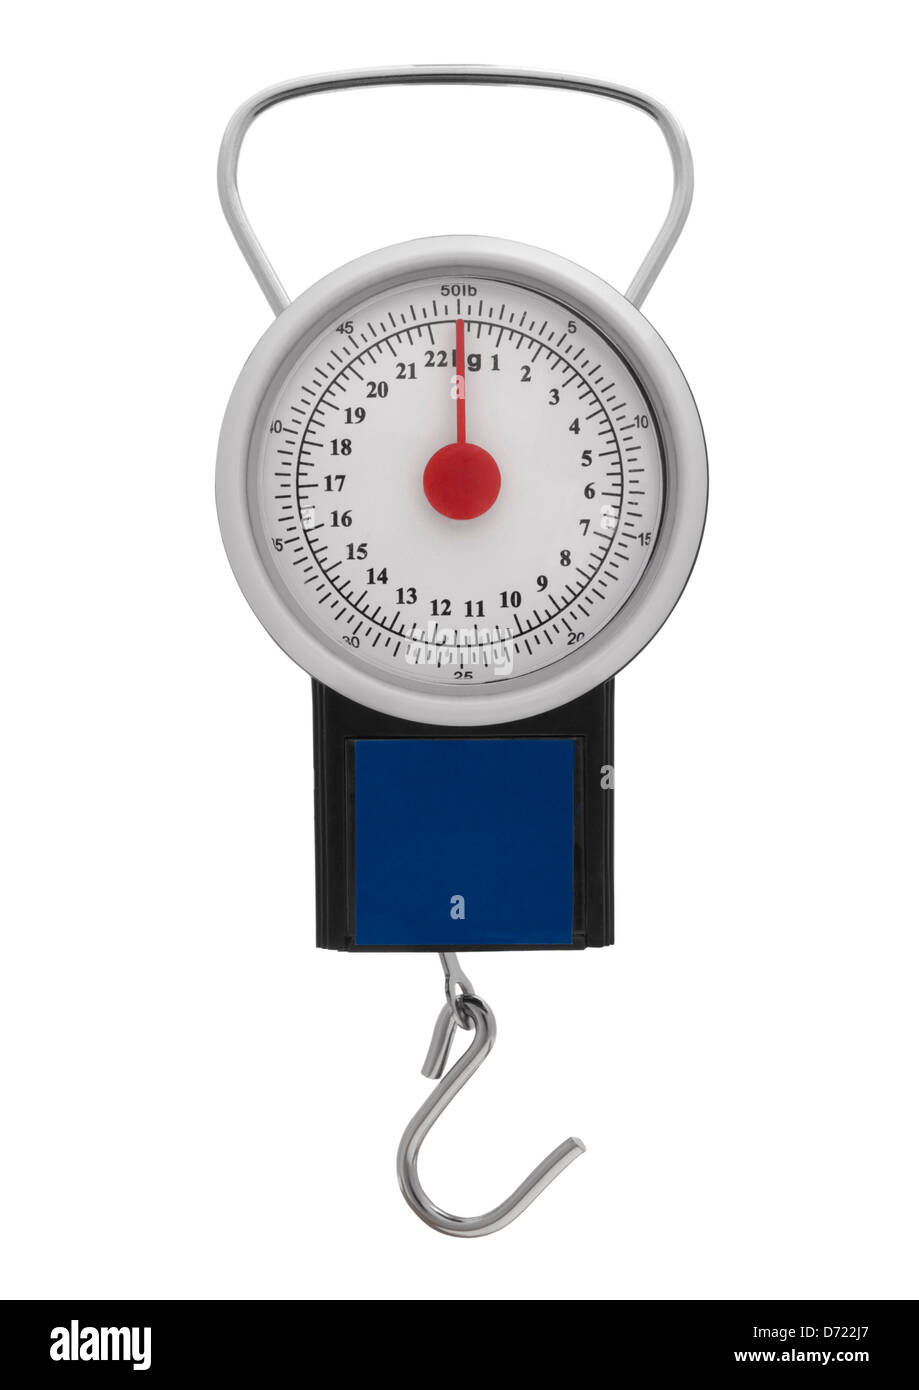 https://c8.alamy.com/comp/D722J7/compact-portable-luggage-scales-on-white-background-D722J7.jpg